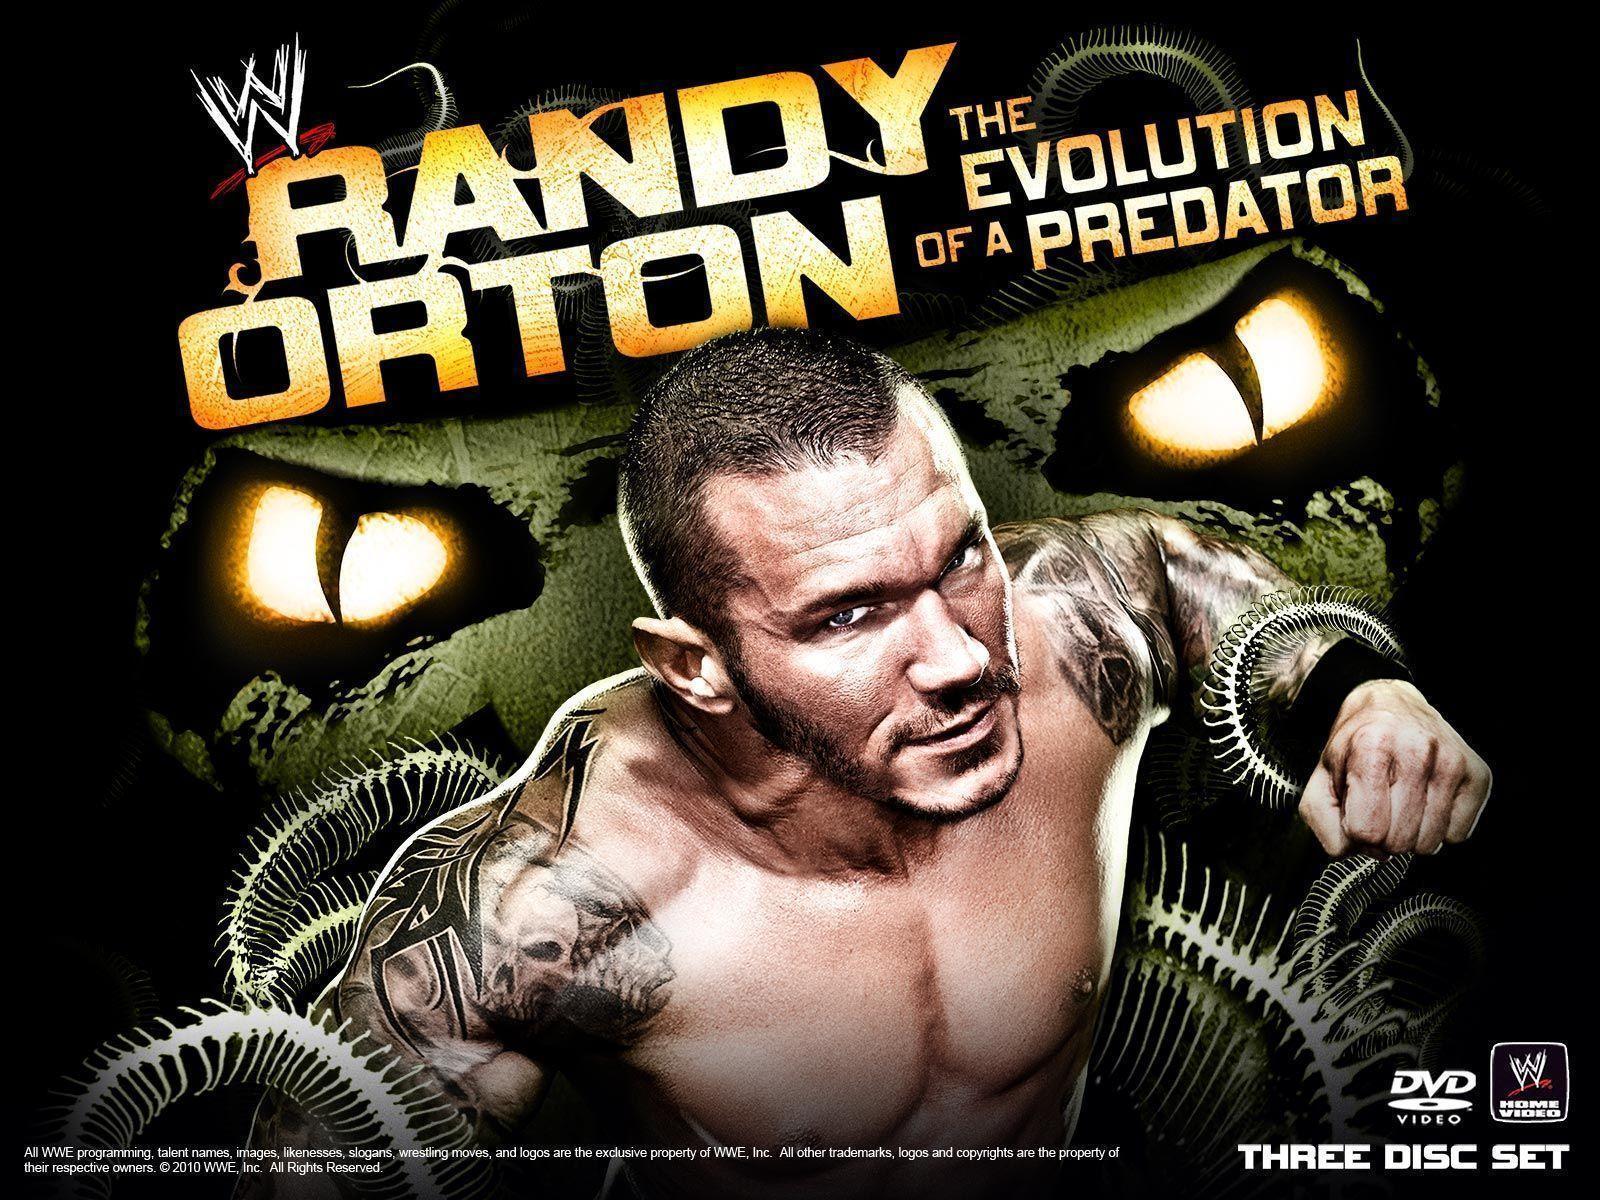 WWE image Evolution of a predator HD wallpaper and background